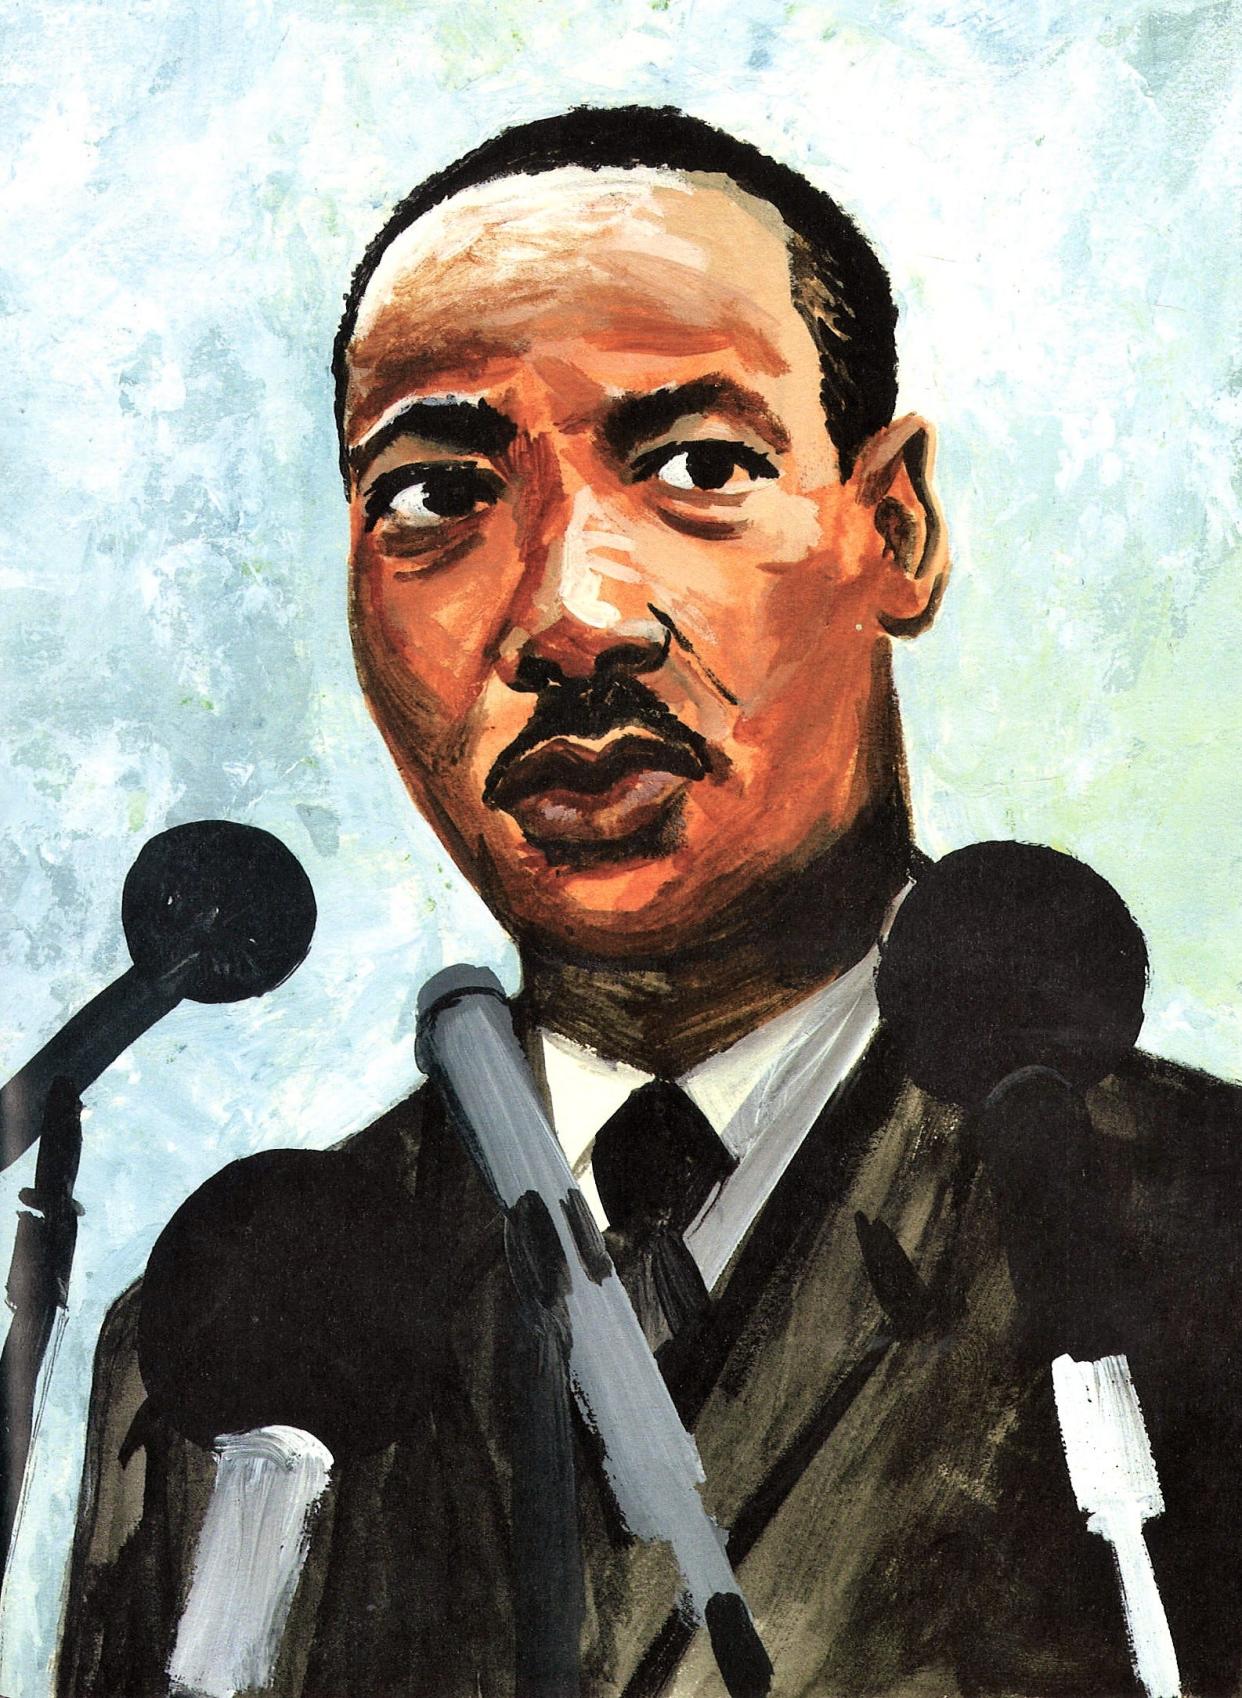 The Rev. Martin Luther King Jr., as illustrated by Greg Christie in "Memphis, Martin, and the Mountaintop," a book by Alice Faye Duncan.